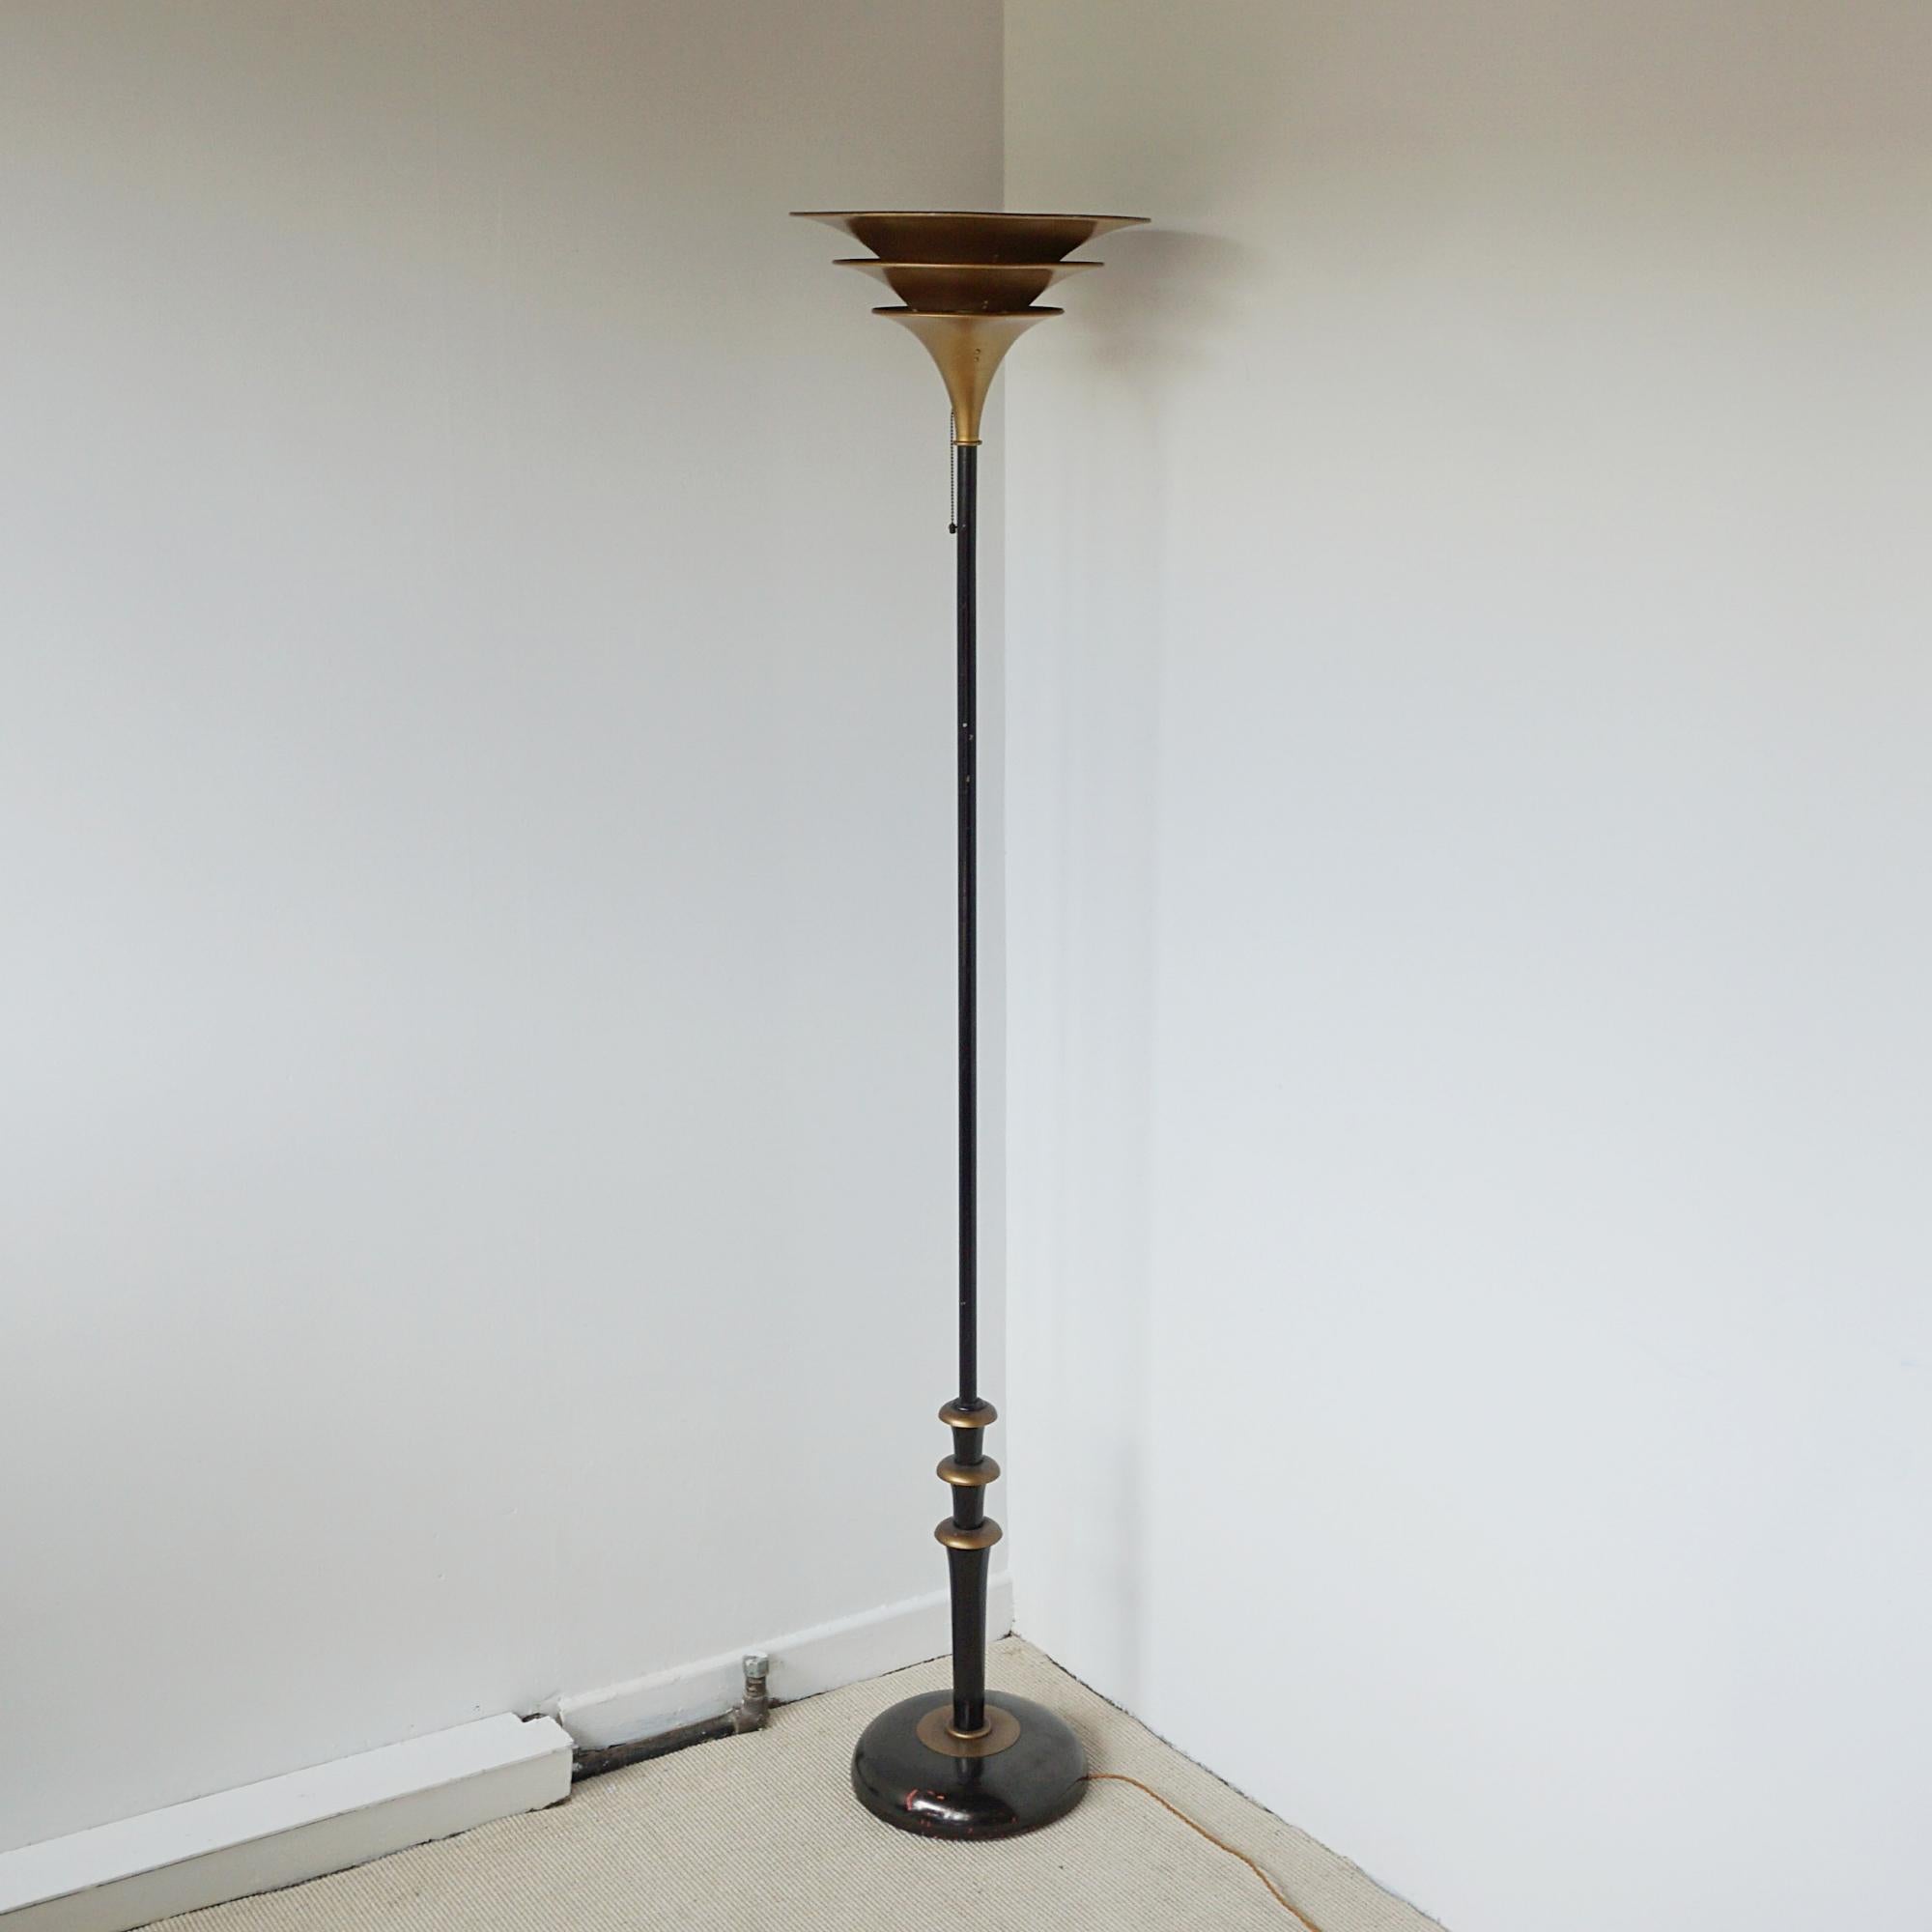 A brass and enamel uplighter with roundels to stem and conical graduating brass shade. Scratches to bass in keeping with age and use. 

Dimensions: H 191cm W 40cm 

Origin: French 

Date: Circa 1935

Item Number: 2404243